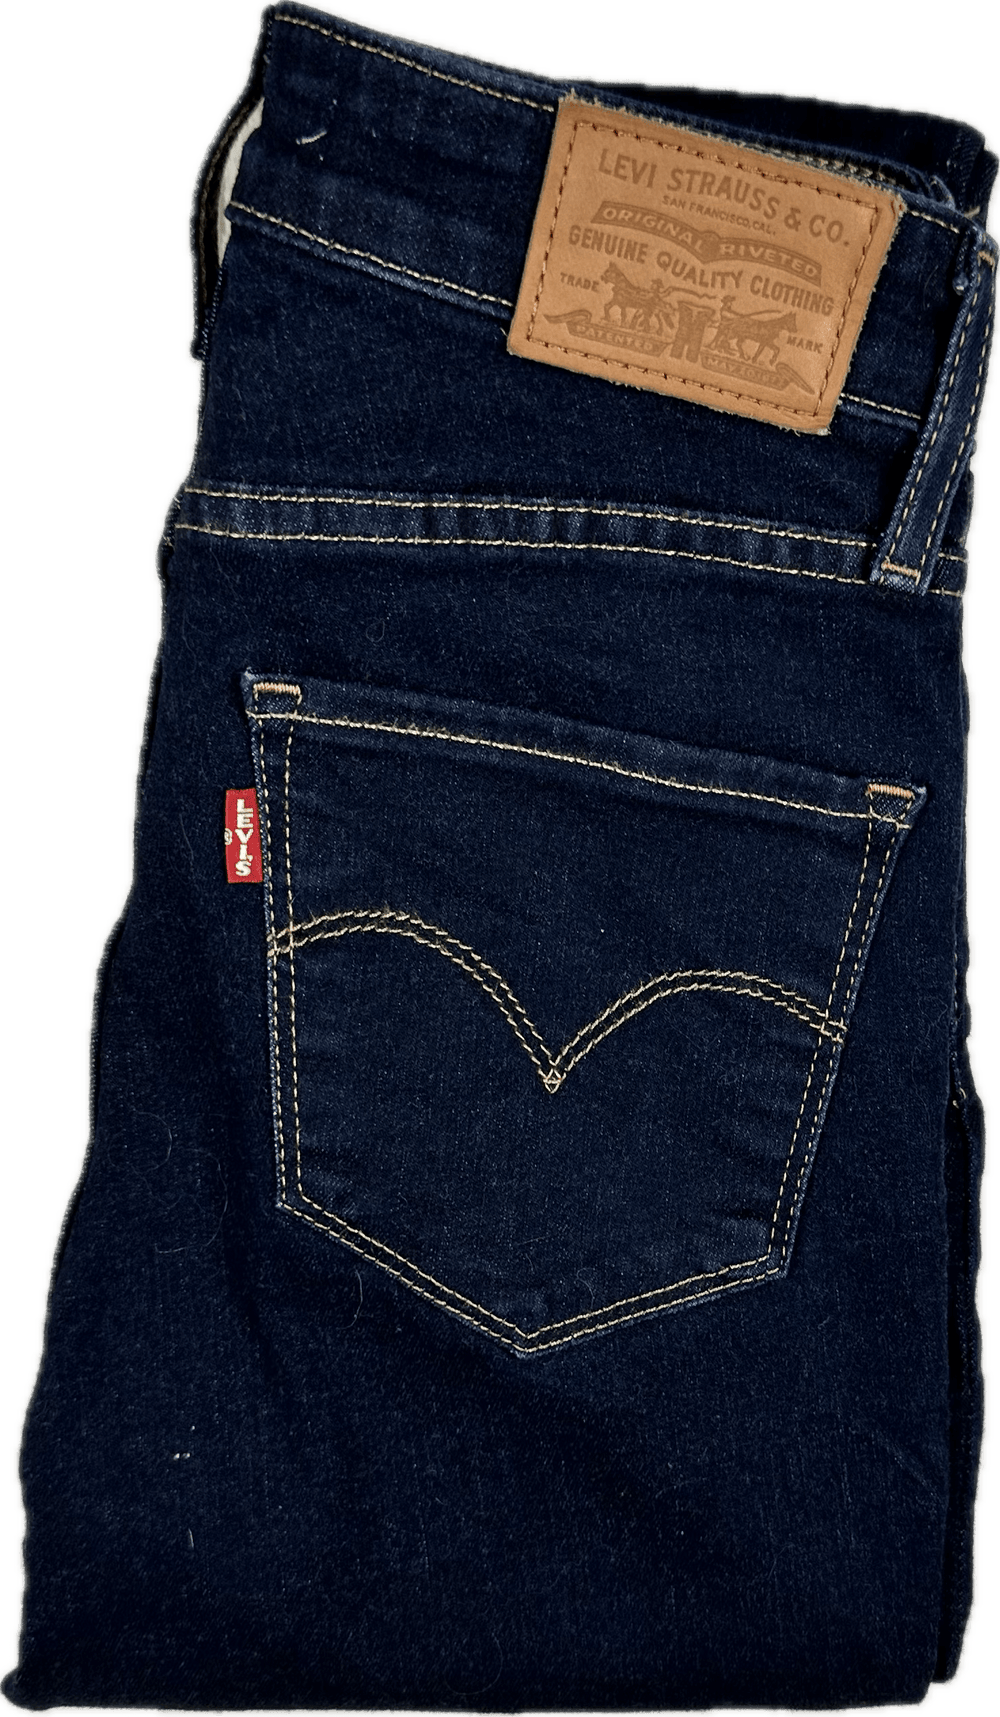 Levis 721 Ladies 'High Rise Skinny' Jeans - Size 25 - Jean Pool